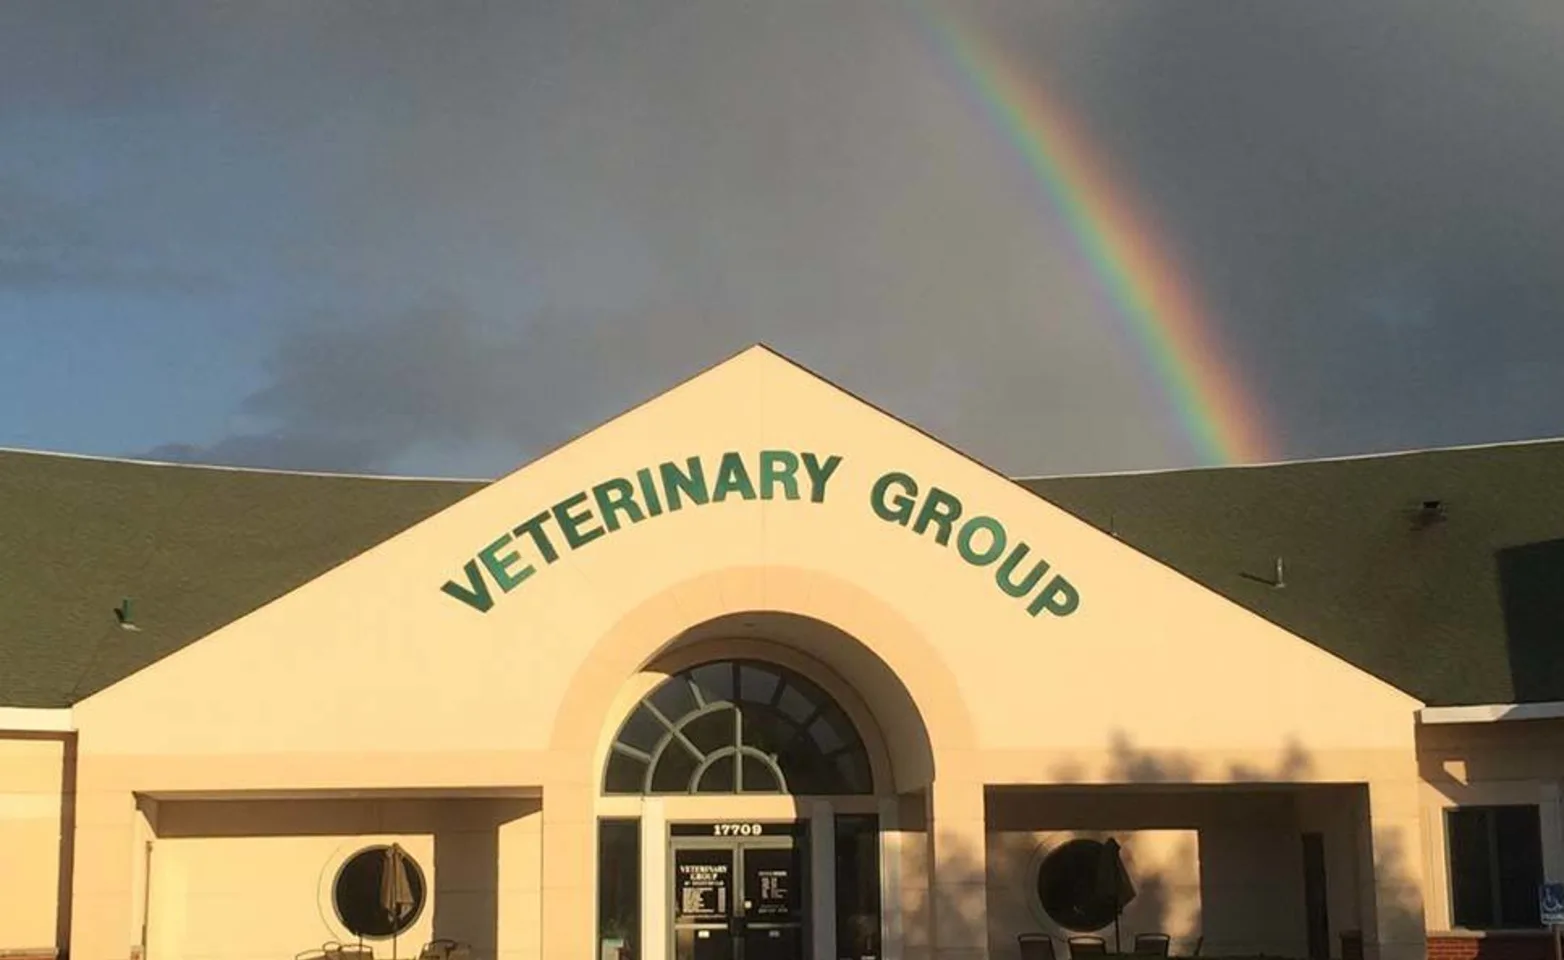 Veterinary Group of Chesterfield Building with rainbow in background